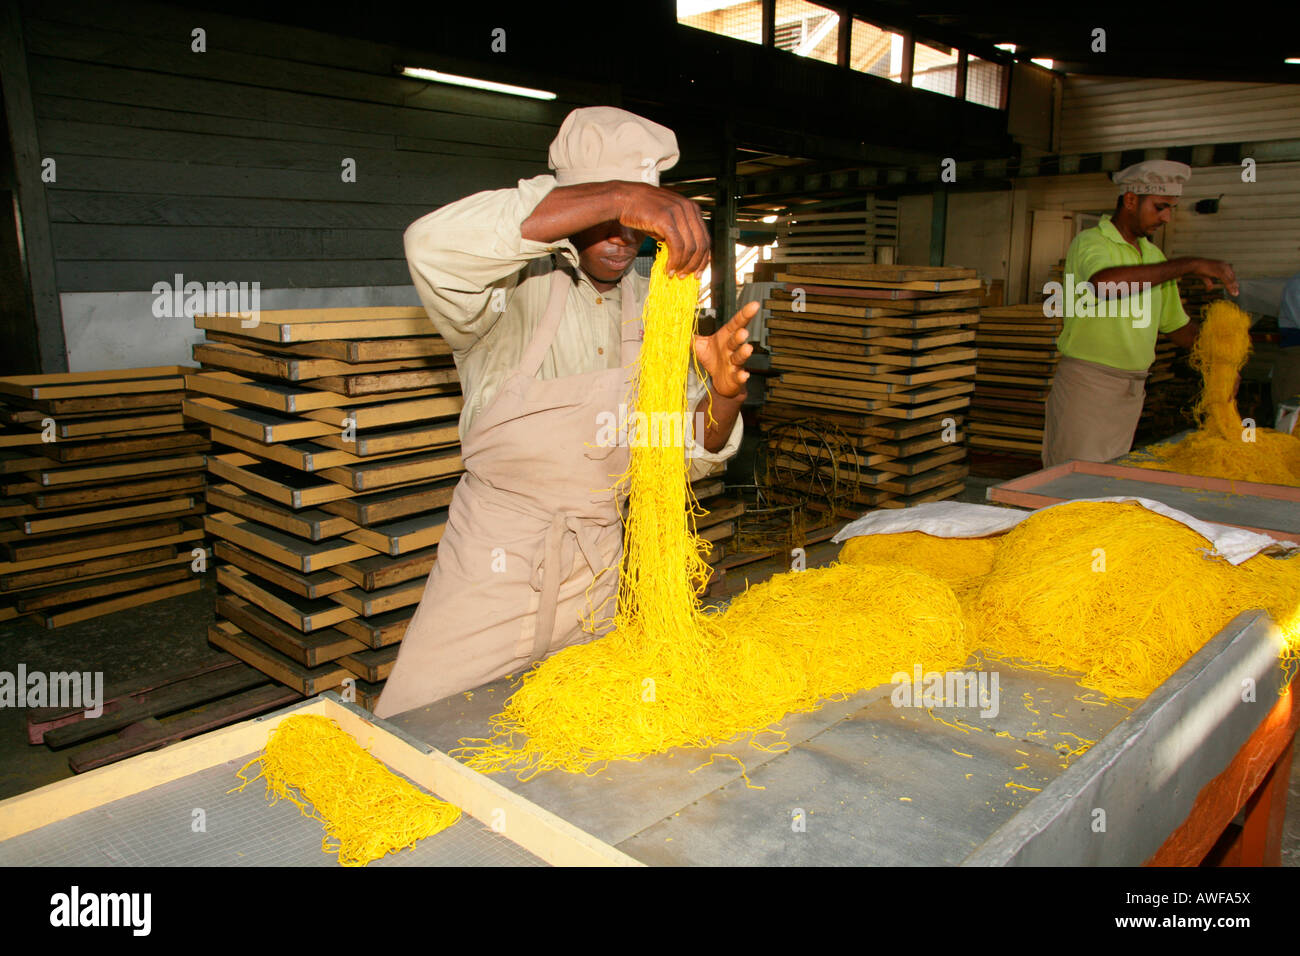 Workers engaged in the production of pasta at pasta factory, Demerara Province, Guyana, South America Stock Photo